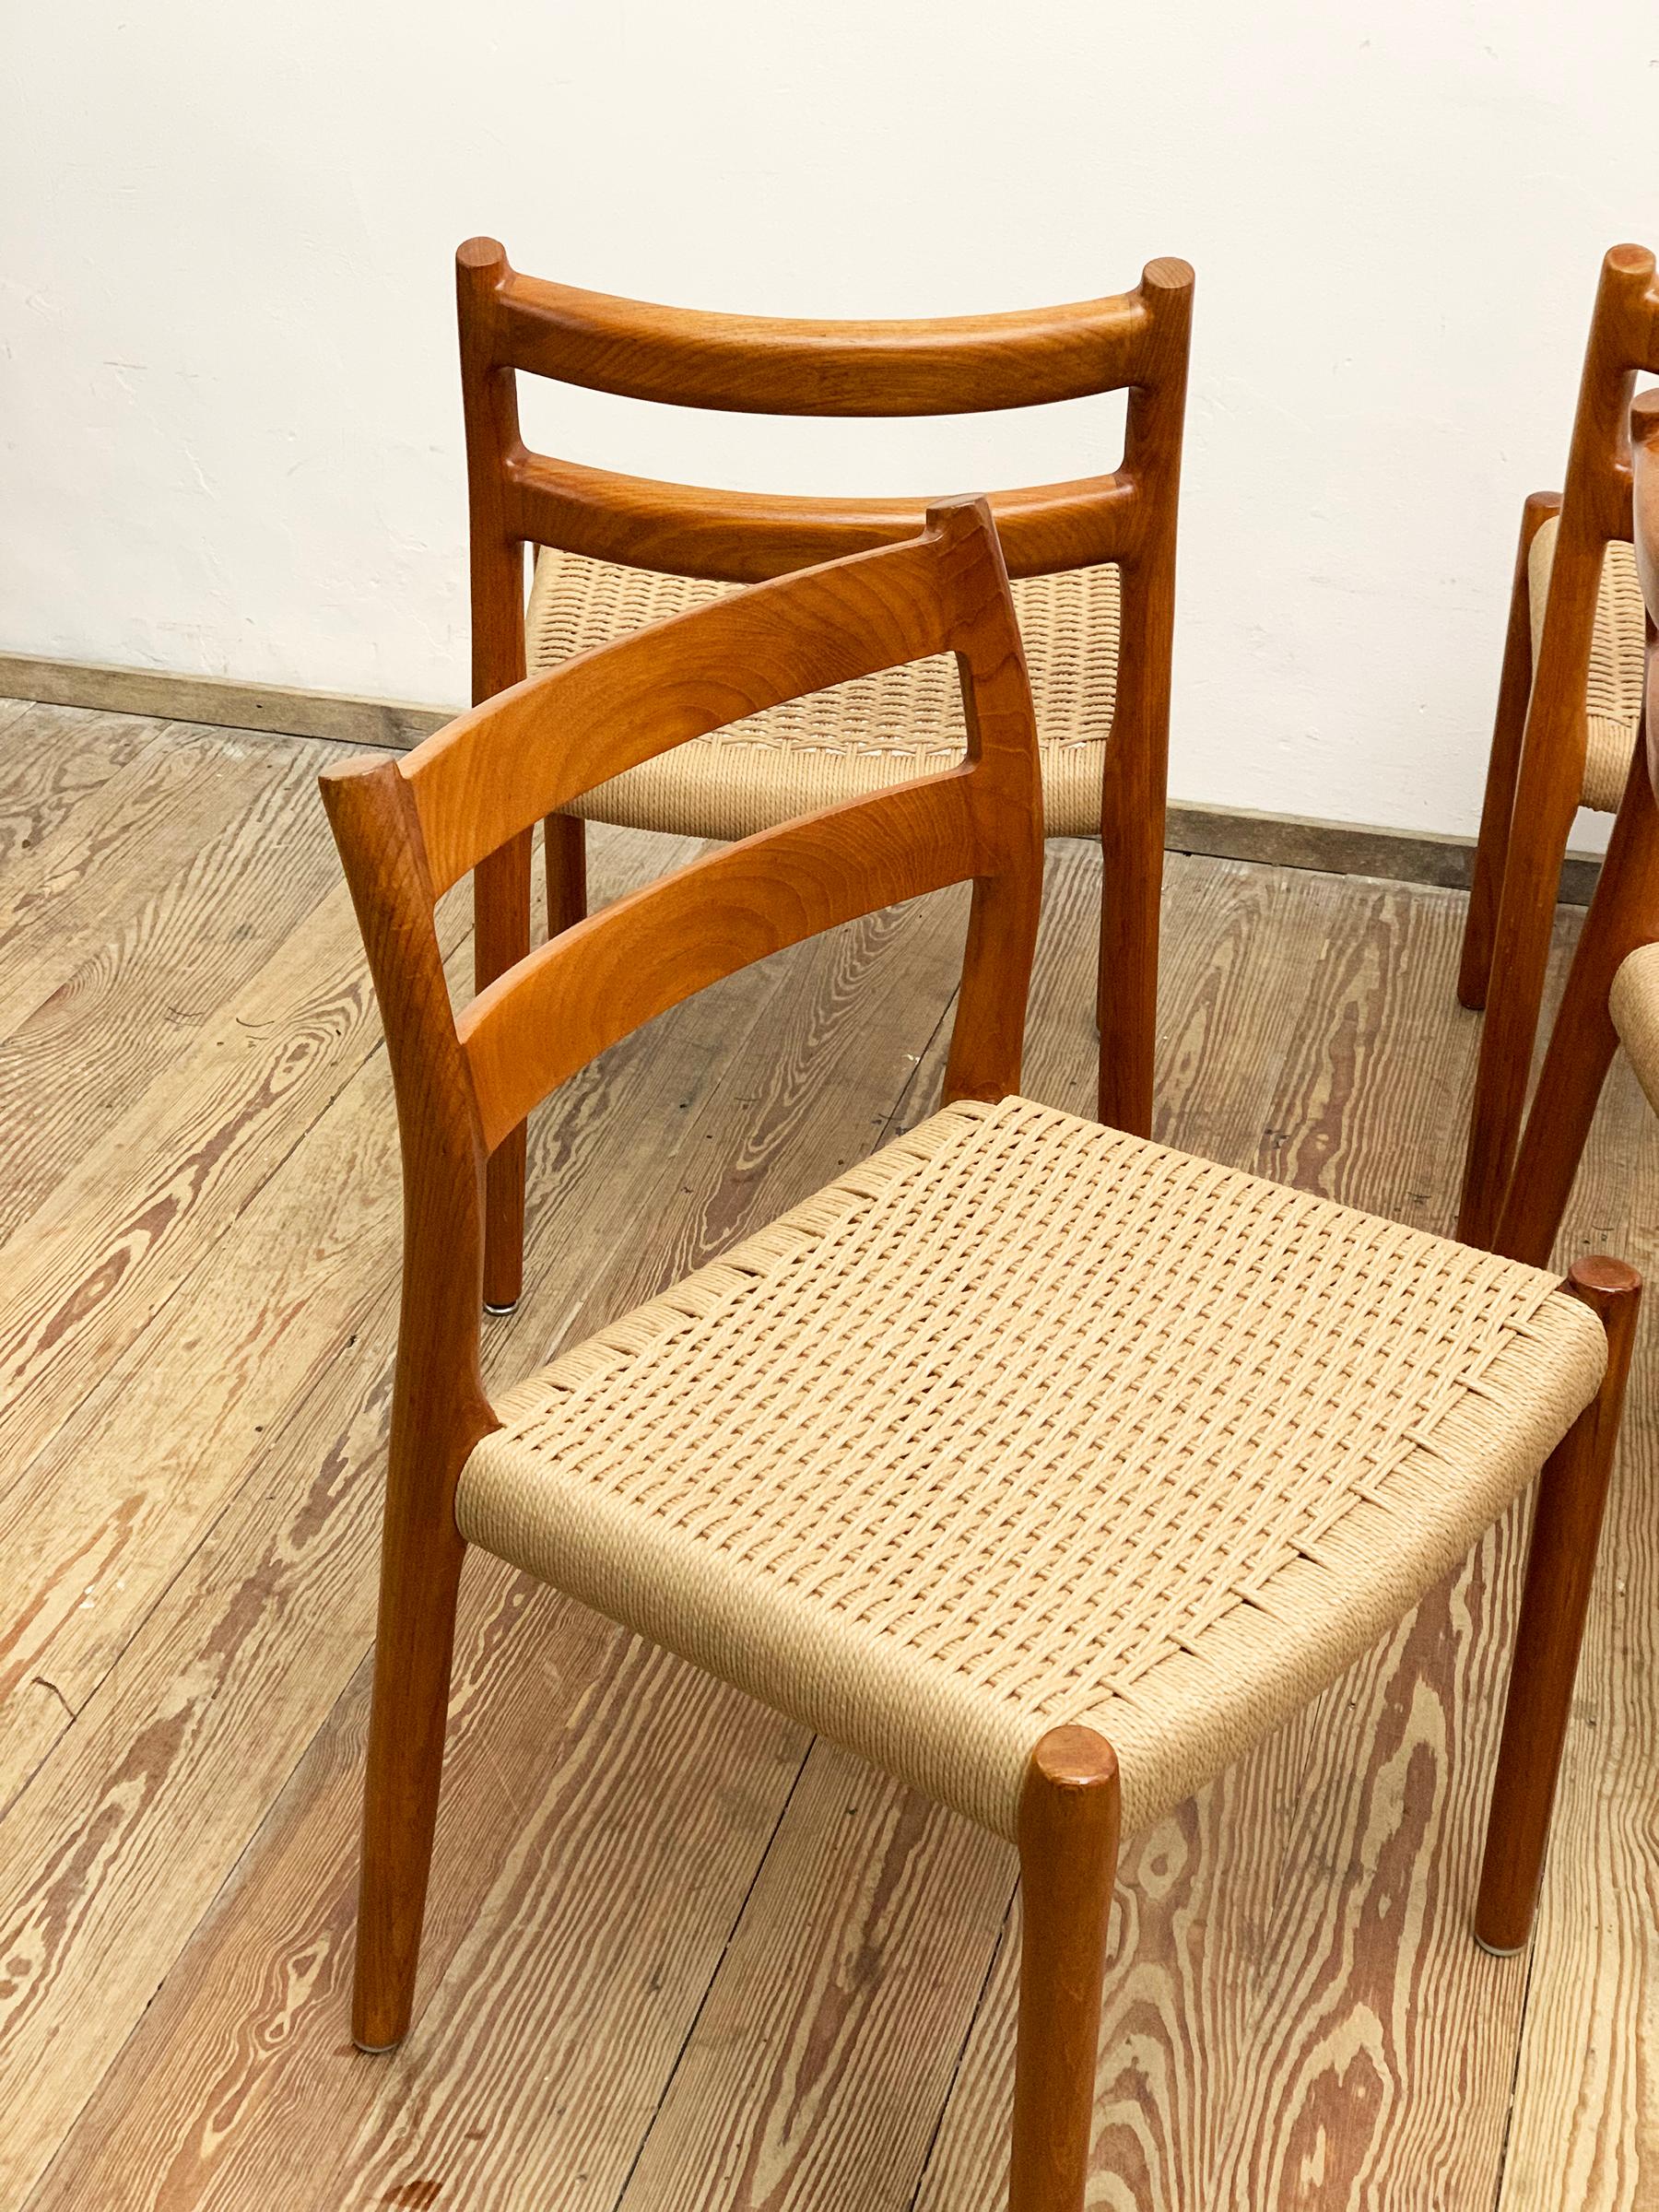 Mid-20th Century 4 Danish Mid-Century Teak Dining Chairs #84 by Niels O. Møller for J. L. Moller